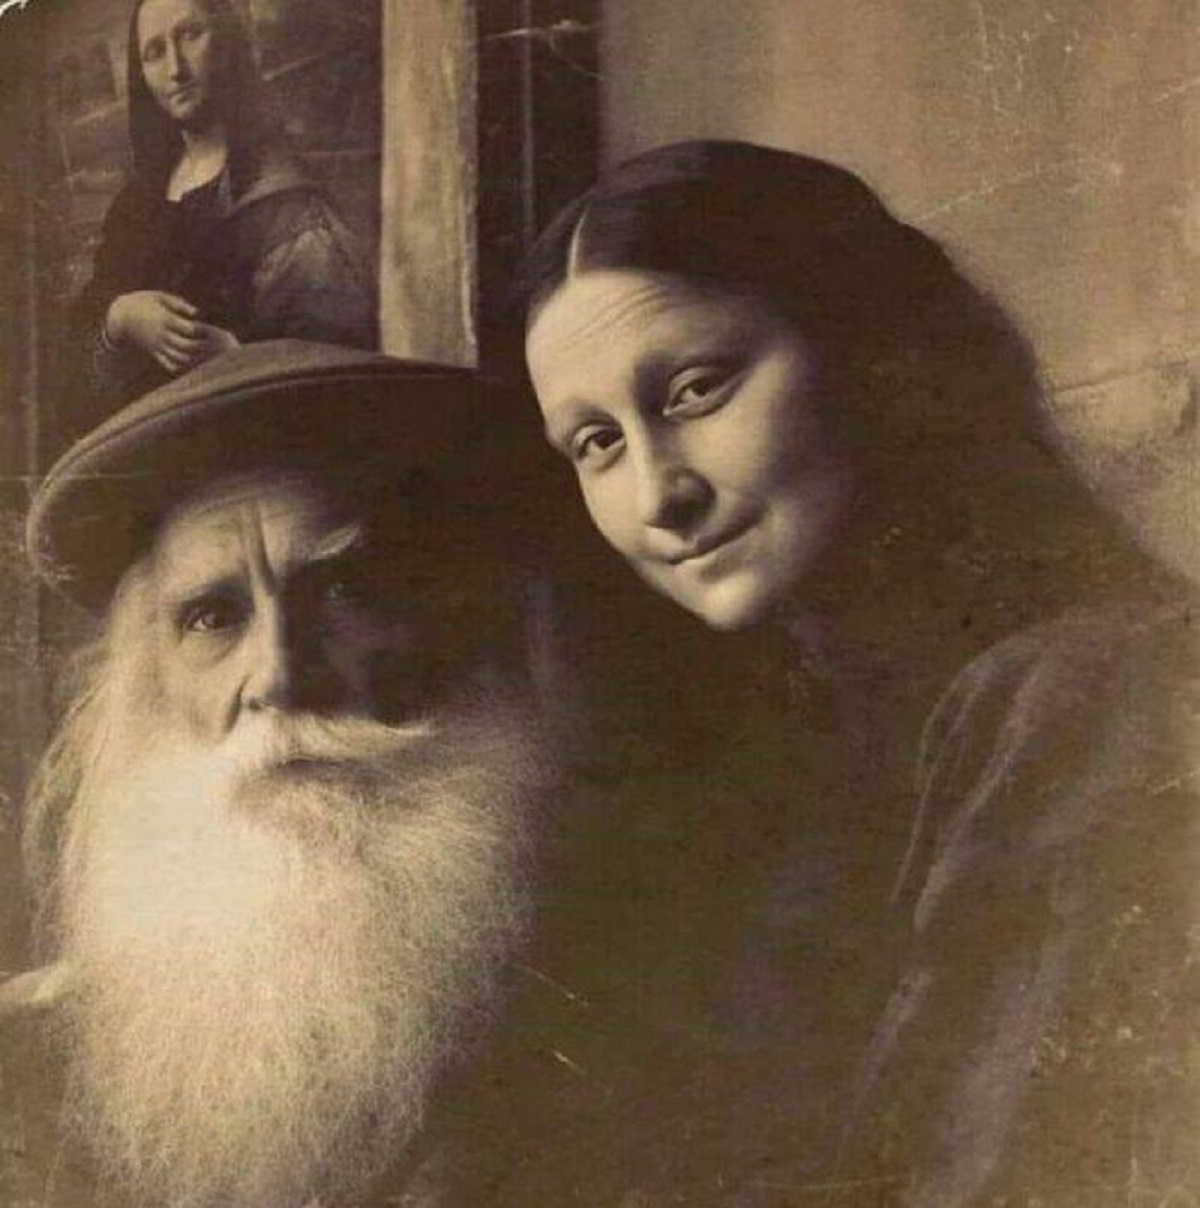 "If Cameras Were Available During The Early 1500s, We Might Have Captured Leonardo Da Vinci's Depiction Of The Italian Noblewoman Lisa Del Giocondo Through The Iconic Artwork Known As The Mona Lisa"